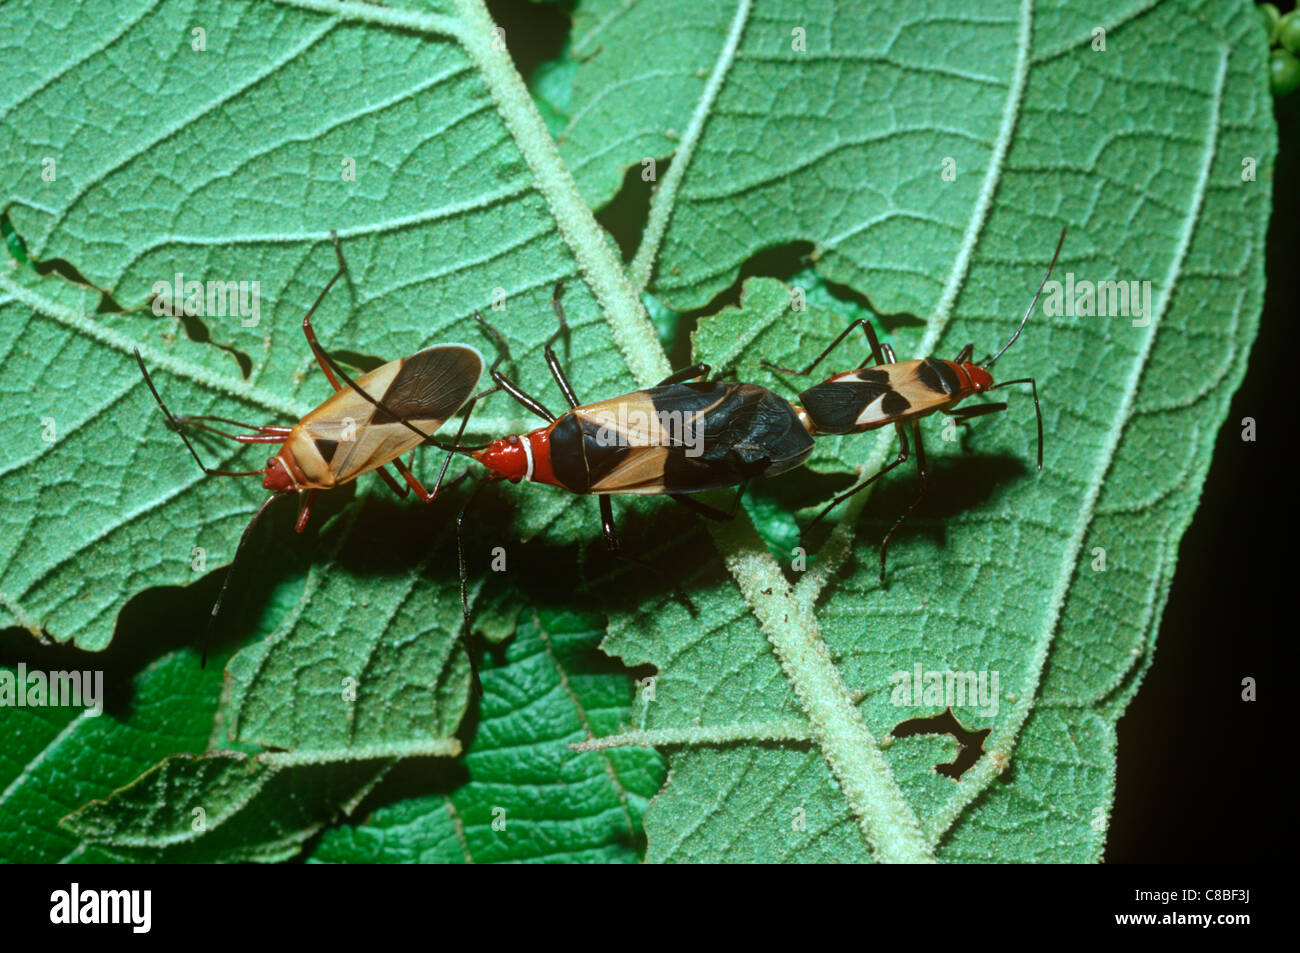 Cotton Stainer bugs (Dysdercus mimus: Pyrrhocoridae) warningly coloured mating pair and cannibalism, cloud forest, Costa Rica. Stock Photo